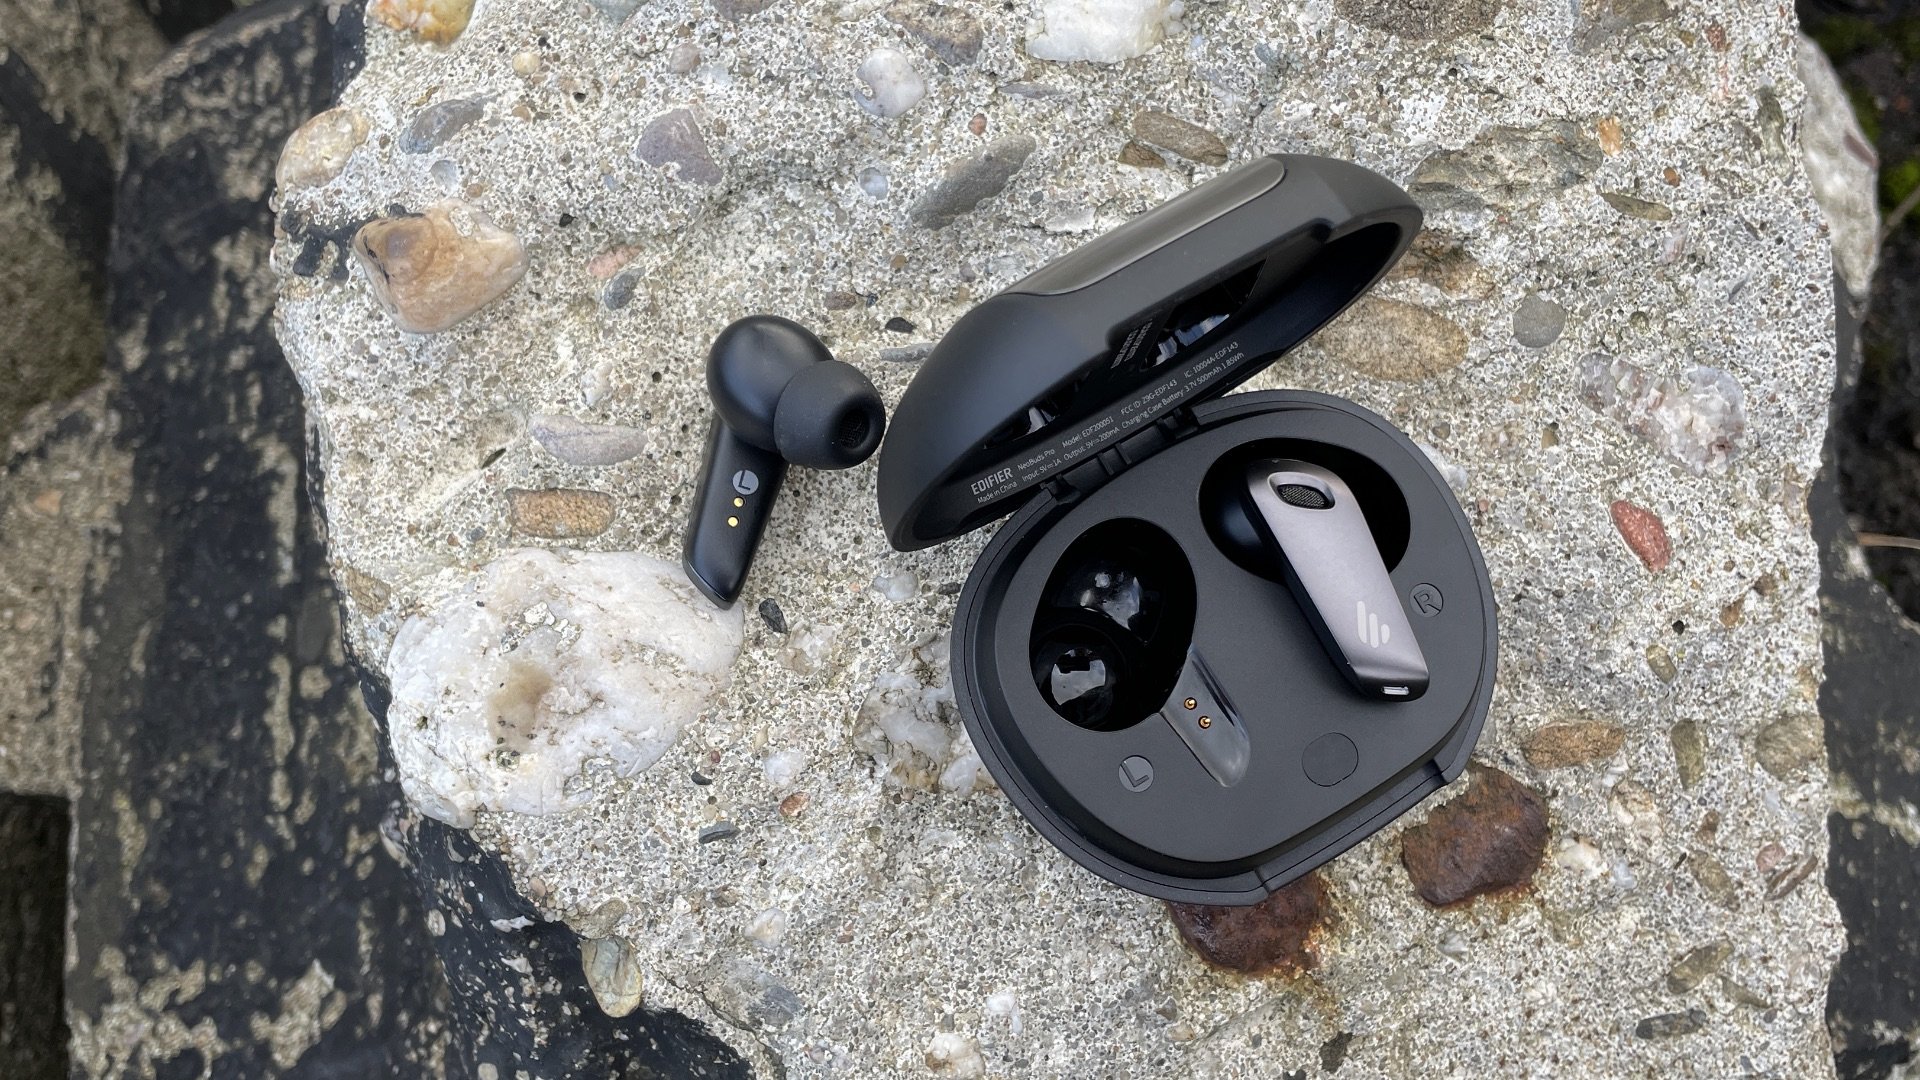 Edifier W820NB ANC Headphones Review – For Life on the Go